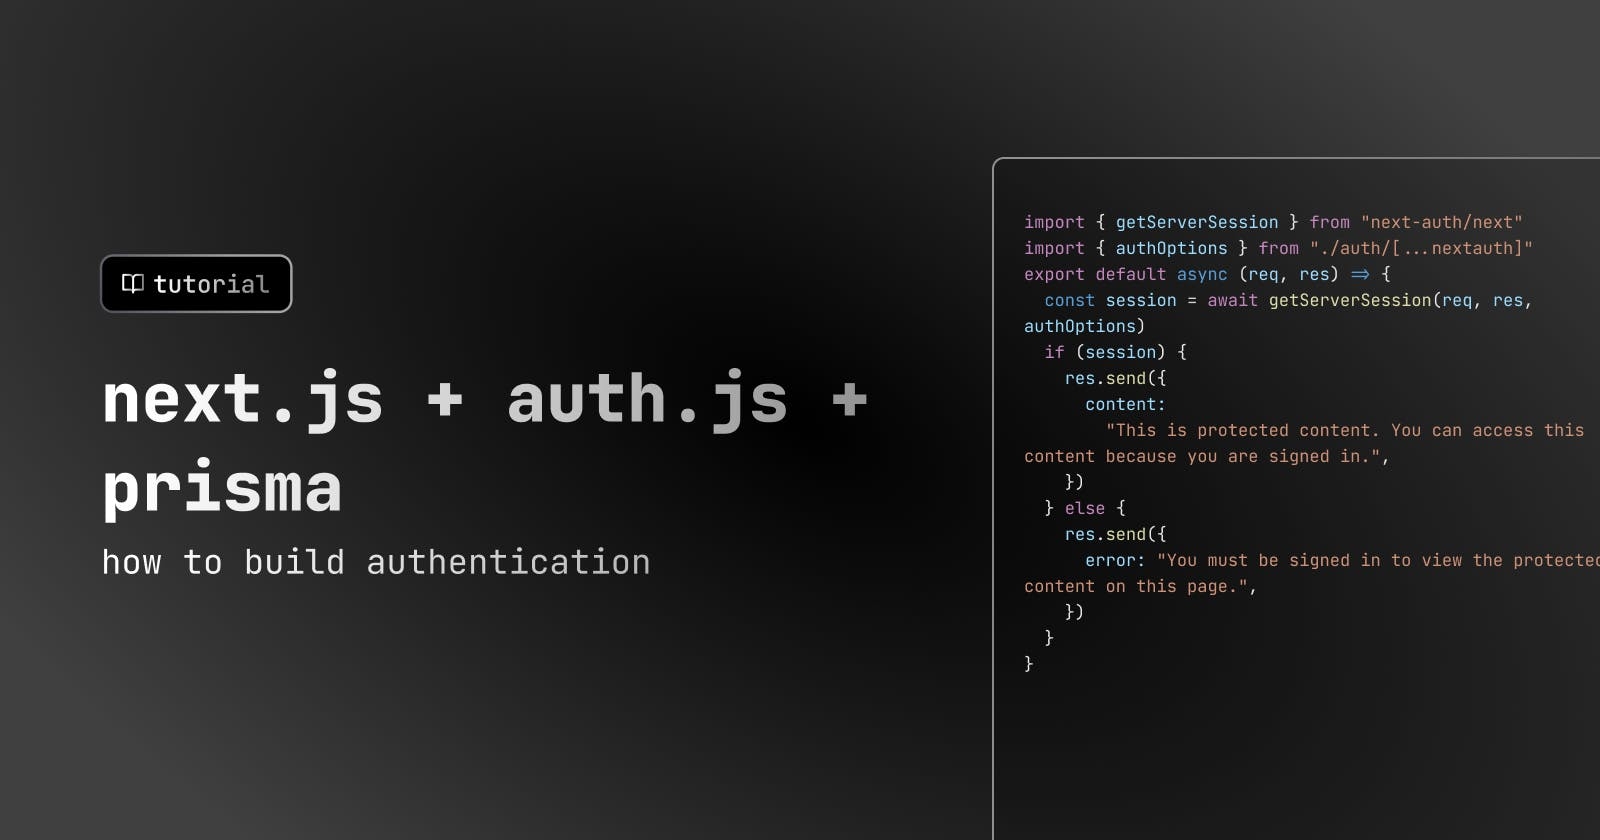 How to build authentication with Next.js, NextAuth, and Prisma